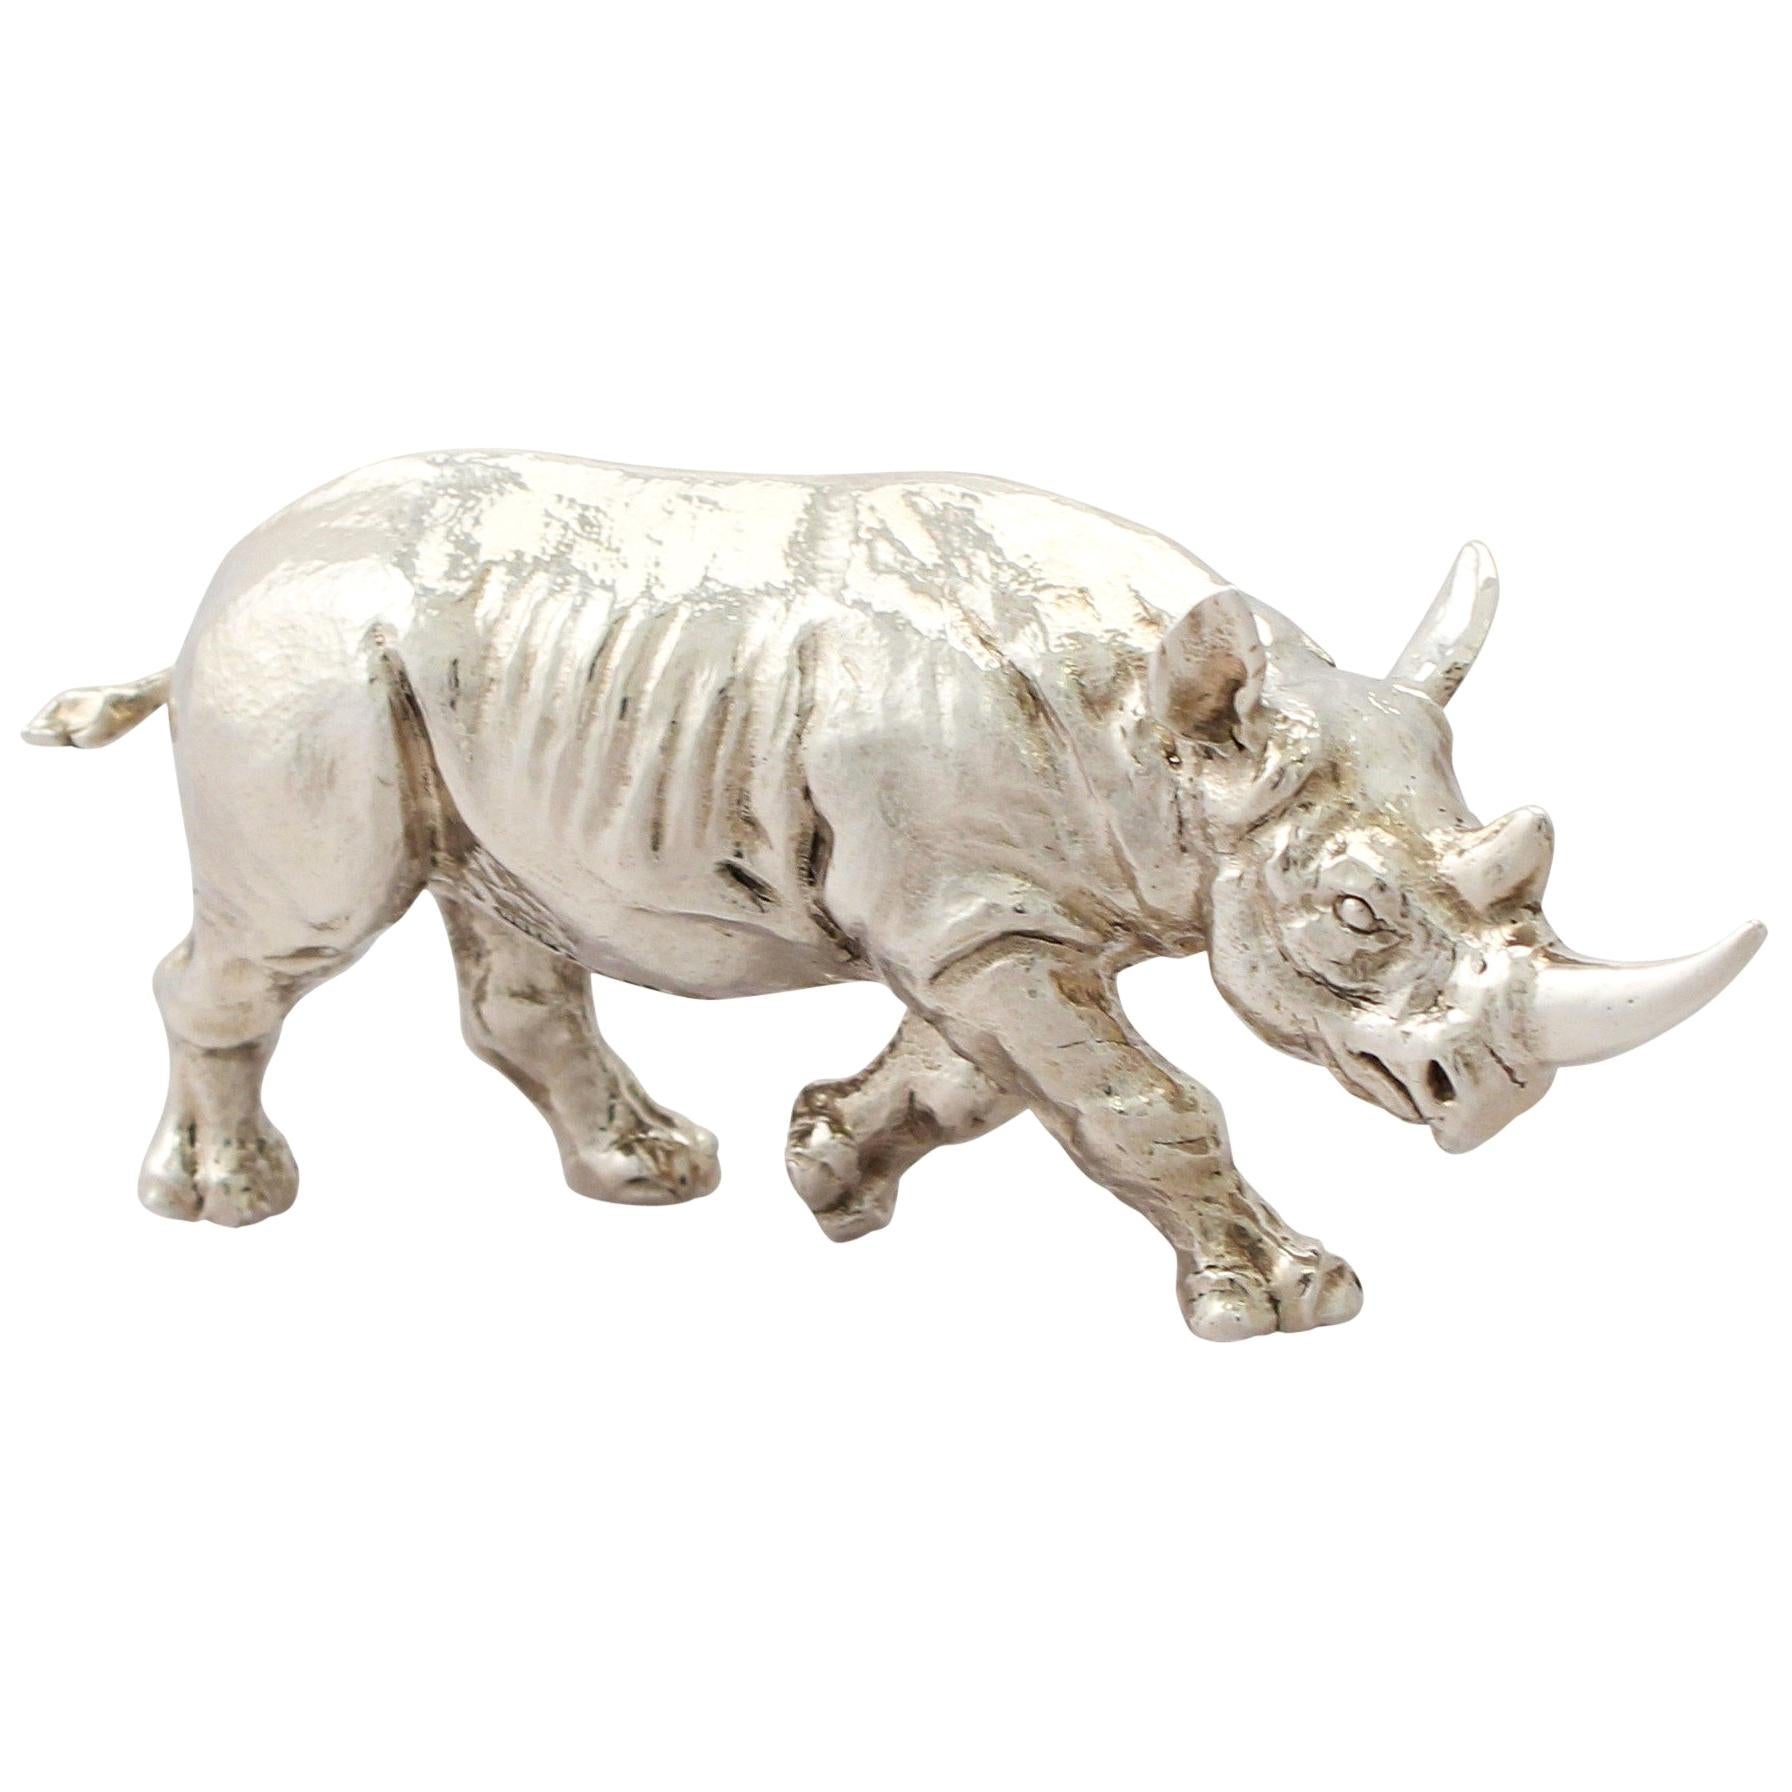 Contemporary Sterling Silver Model of a Rhinoceros, 2011